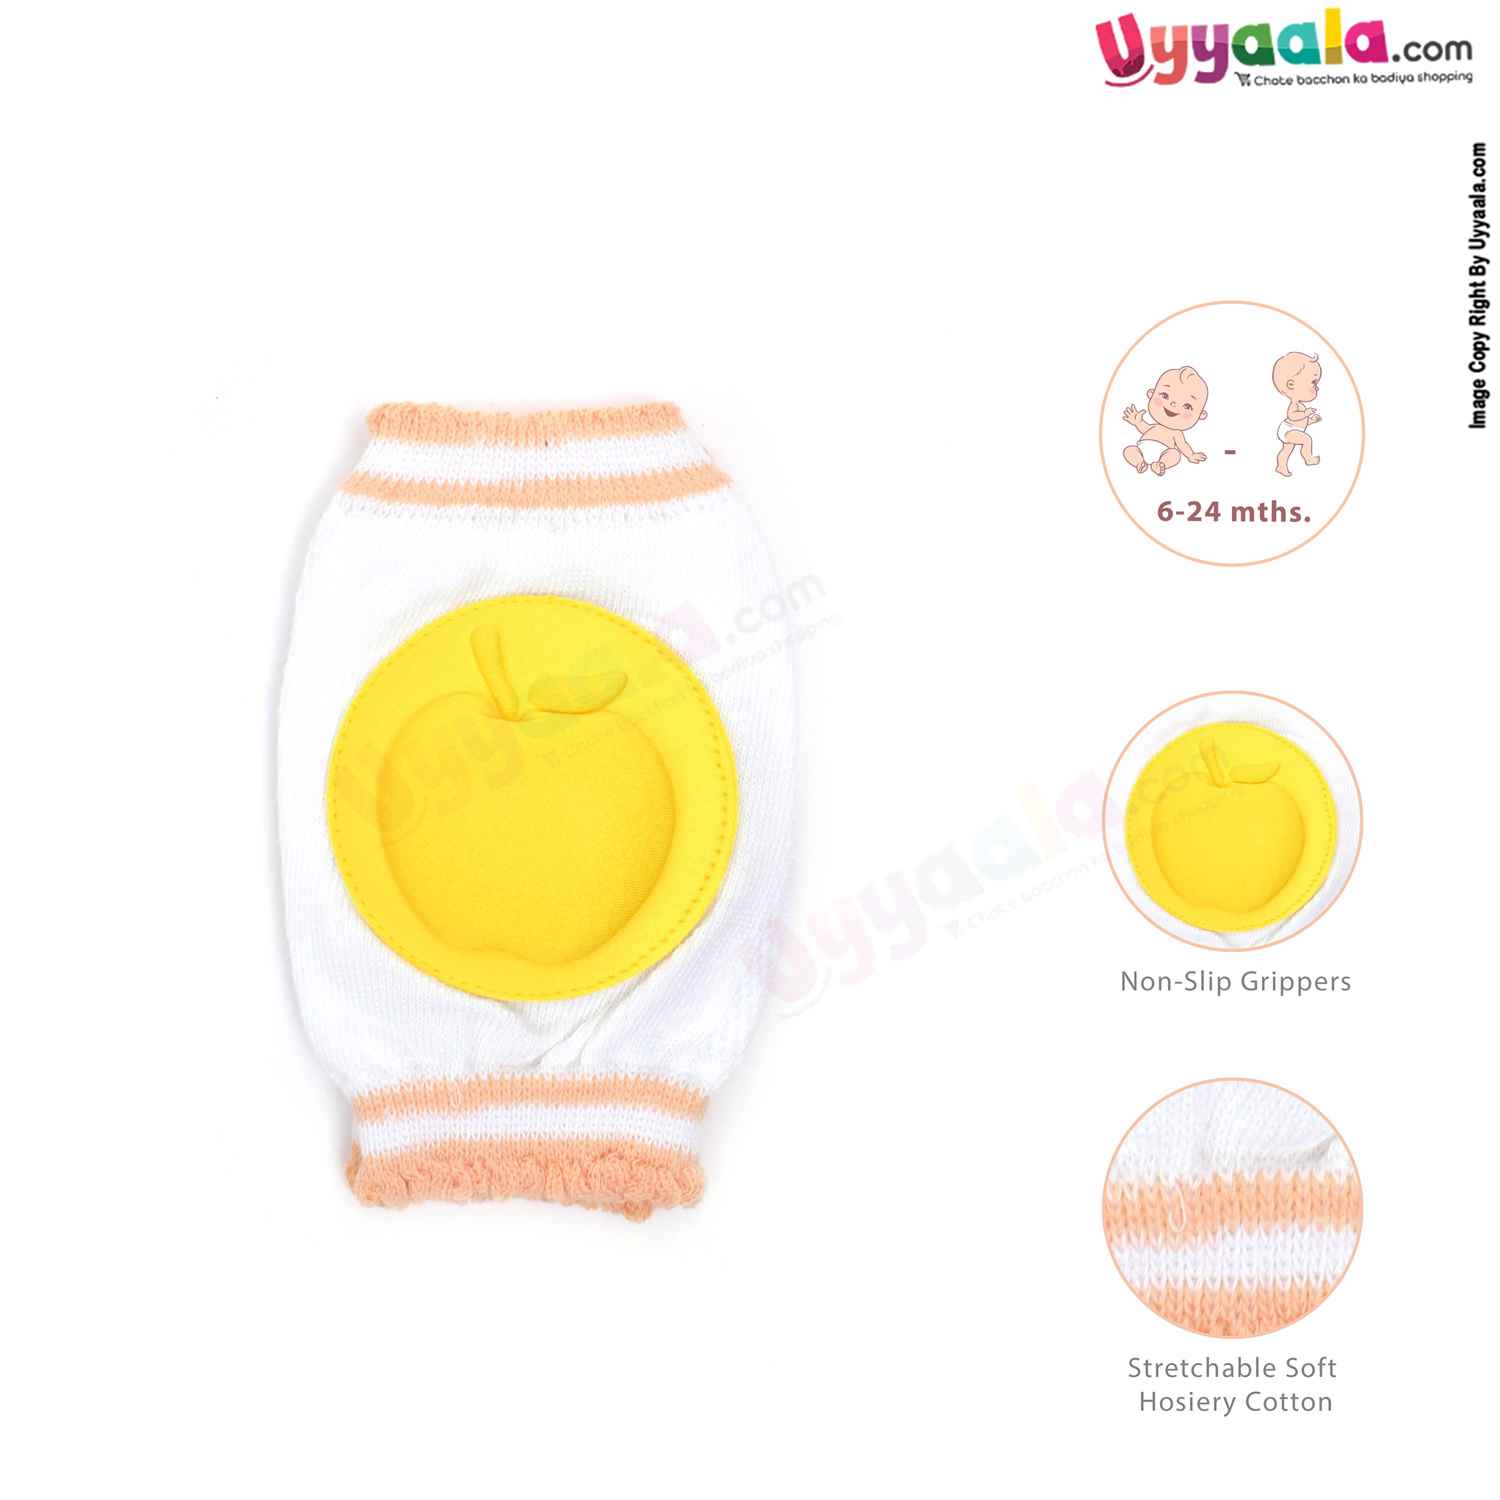 Hosiery Cotton Stretchable Knee Protection Pads for Crawling Babies with Apple Patch Pack of 1 Pair , 6m-2Y Age - White & Yellow